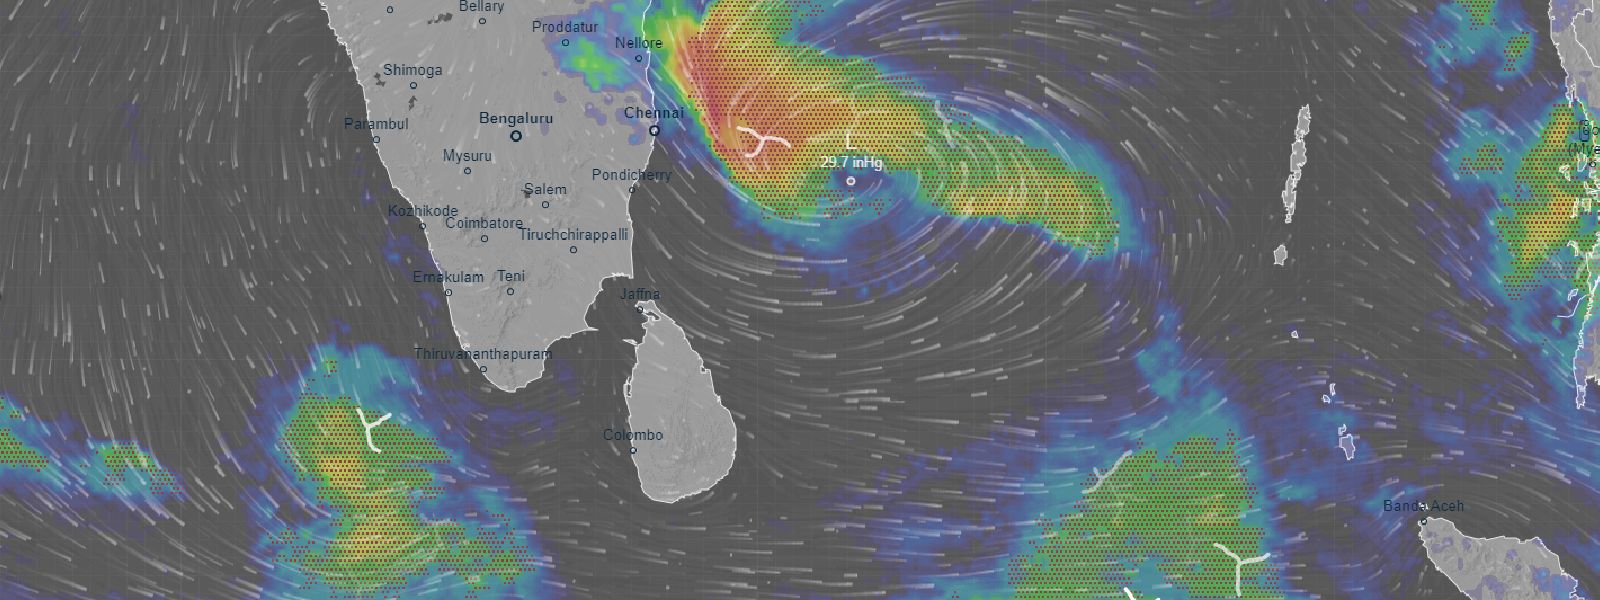 Bay of Bengal depression moving away from SL